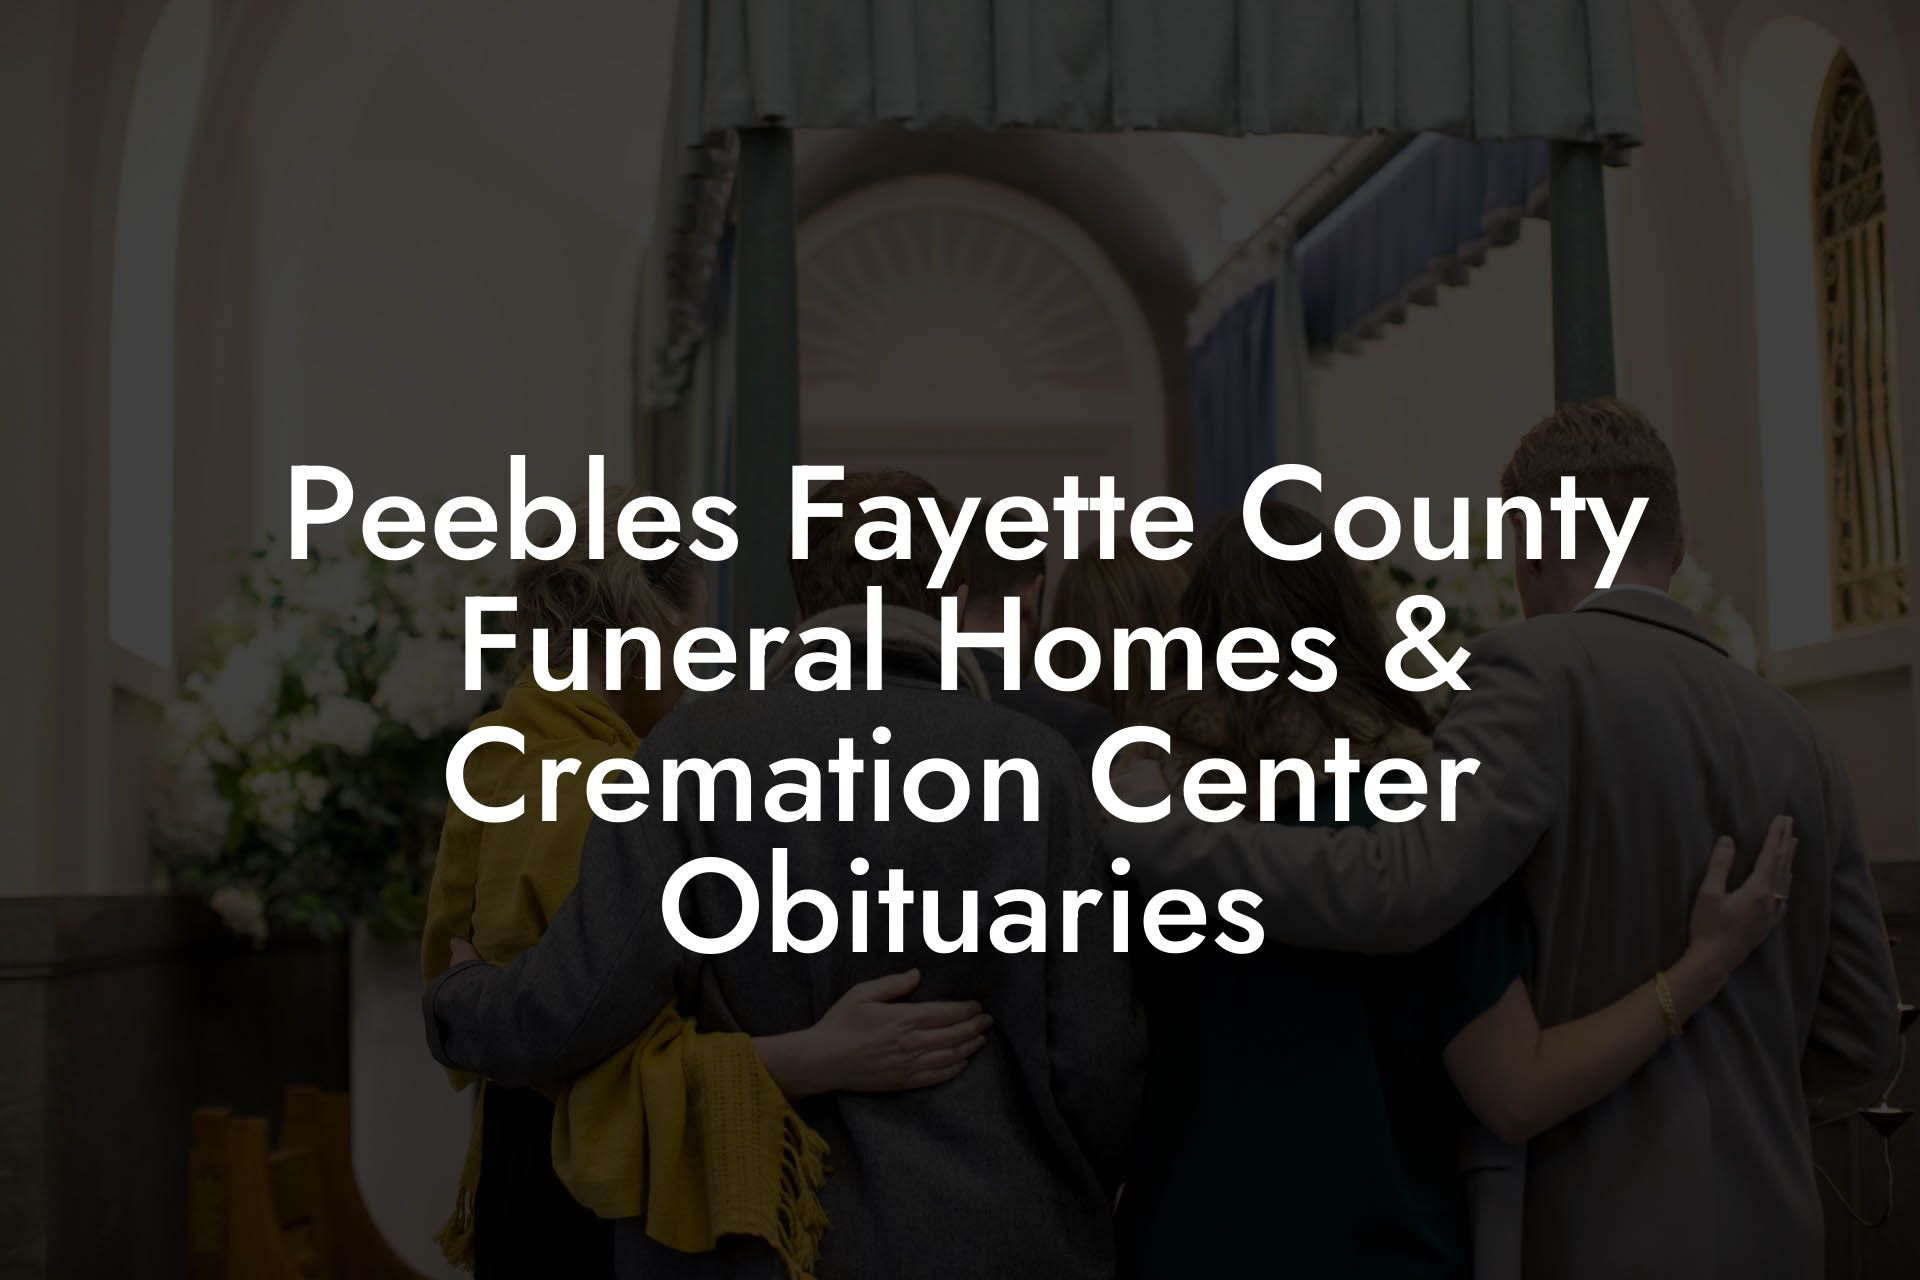 Peebles Fayette County Funeral Homes & Cremation Center Obituaries